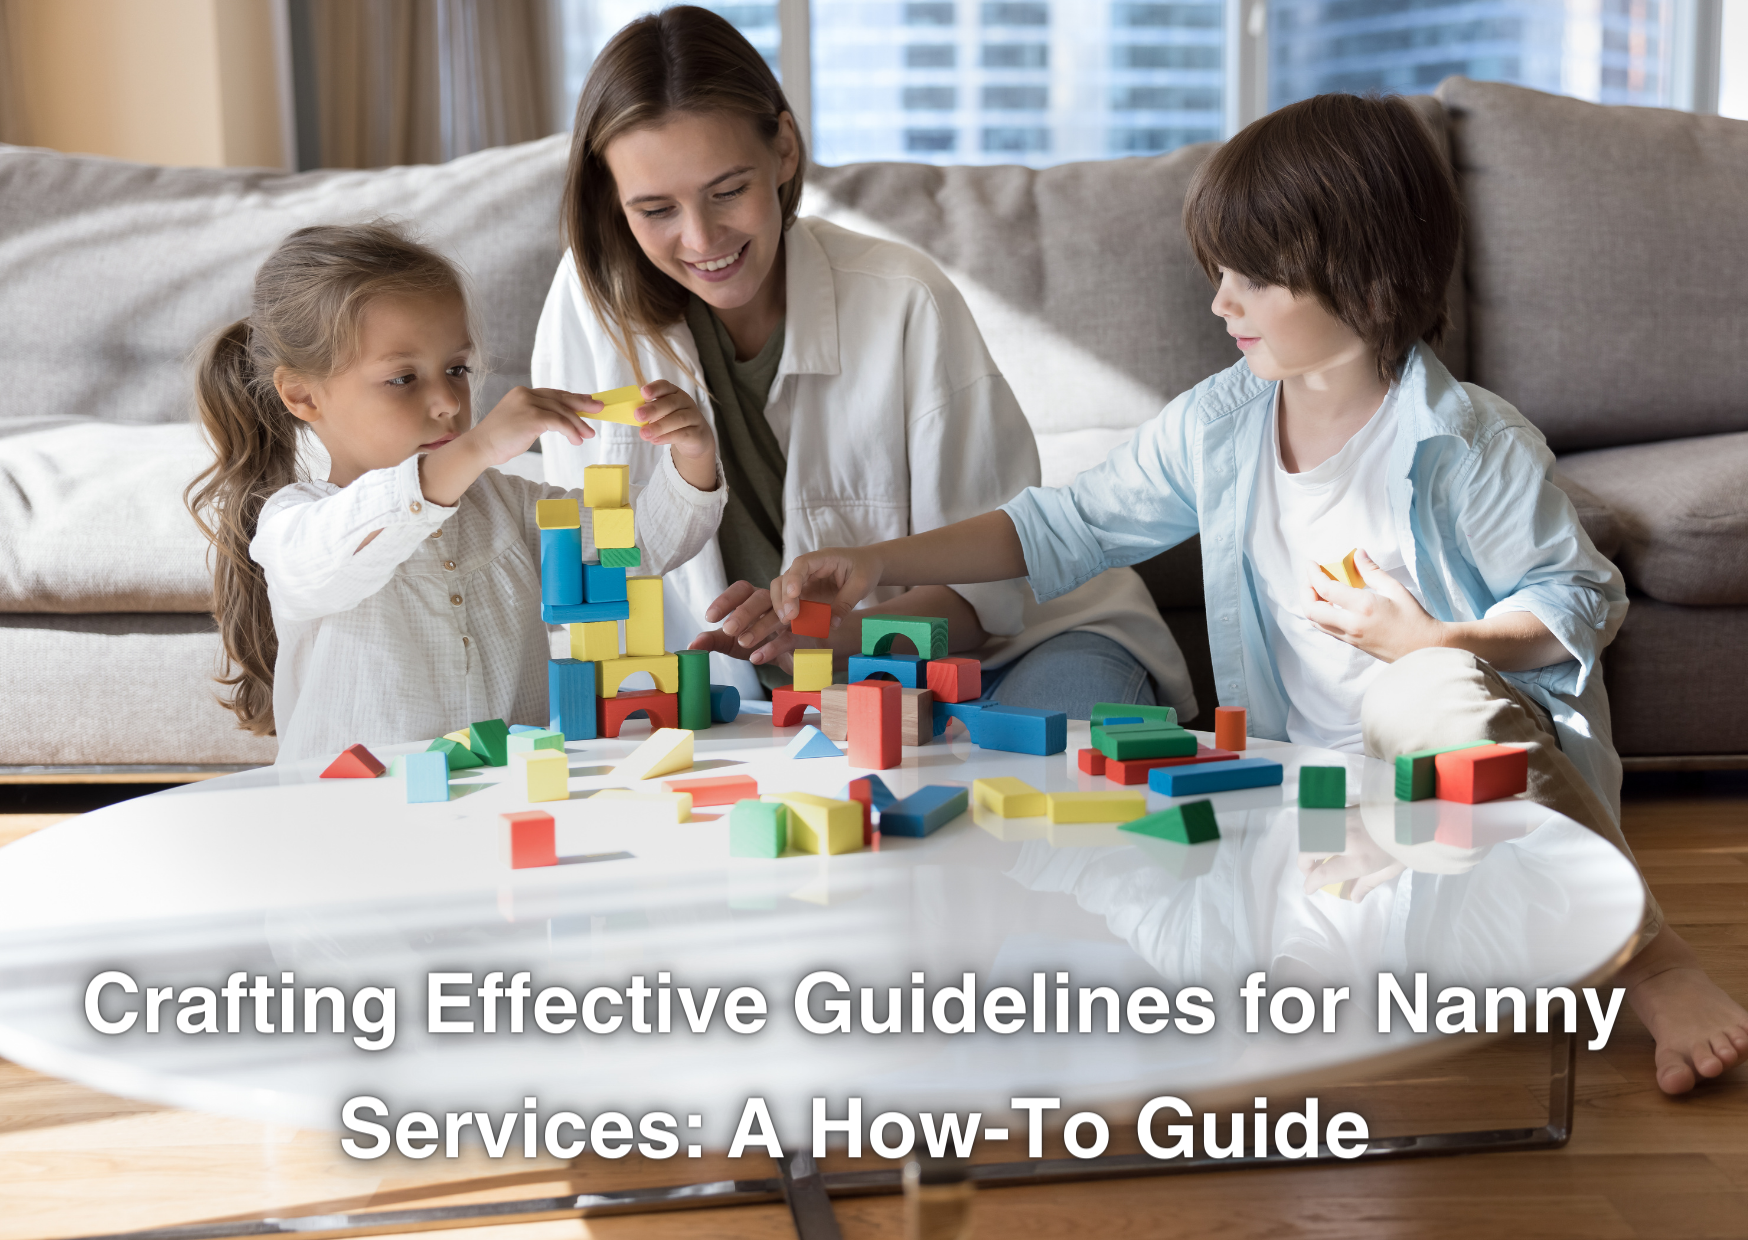 Crafting Effective Guidelines for Nanny Services: A How-To Guide